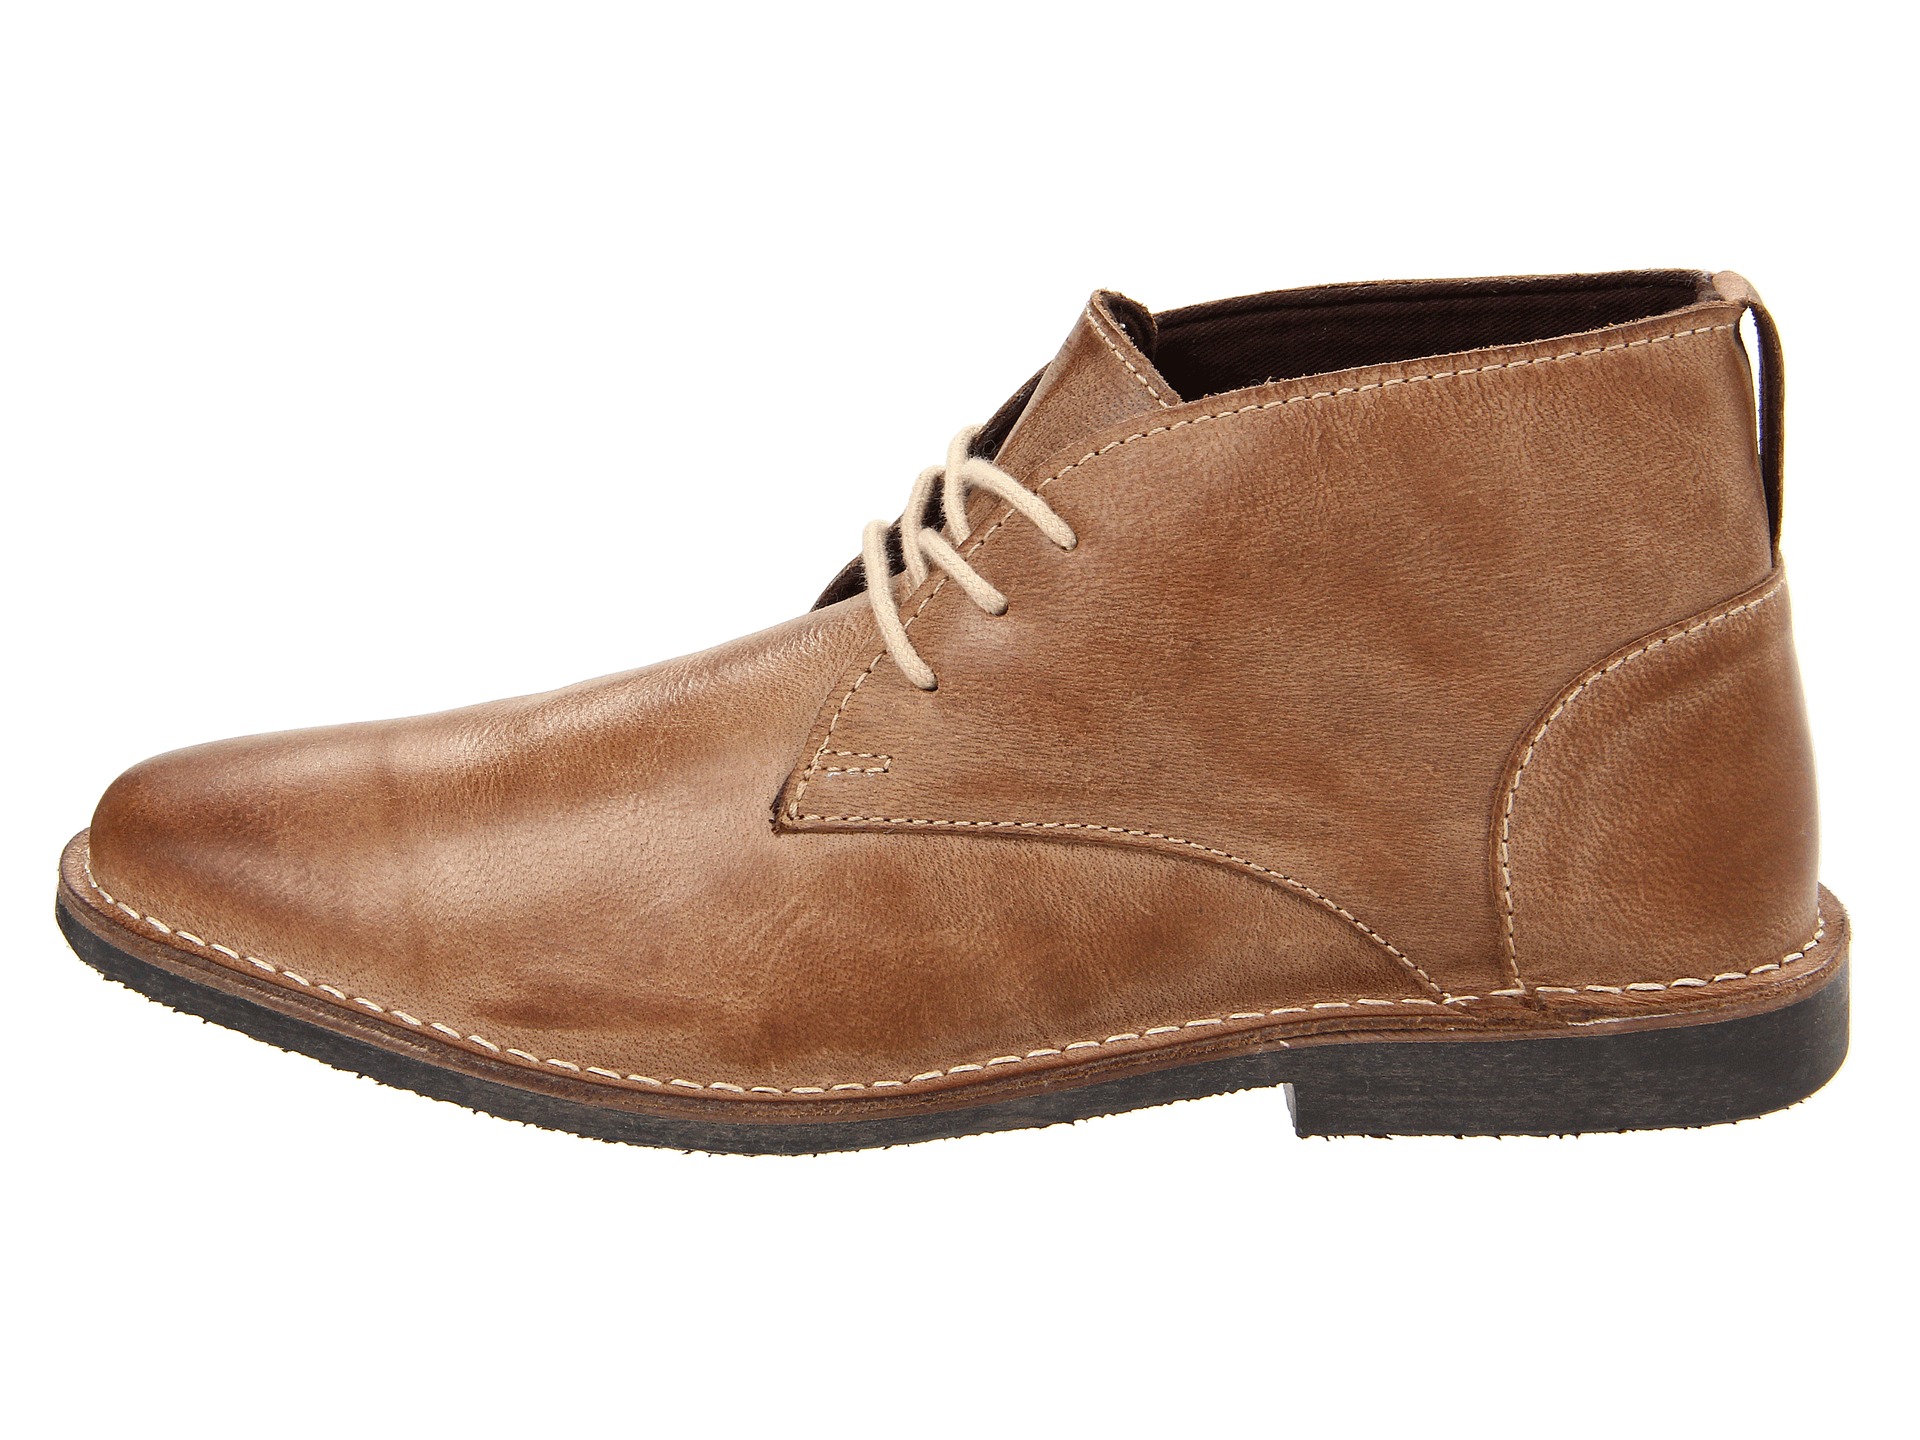 Steve Madden Hamilten Taupe Leather | Shipped Free at Zappos